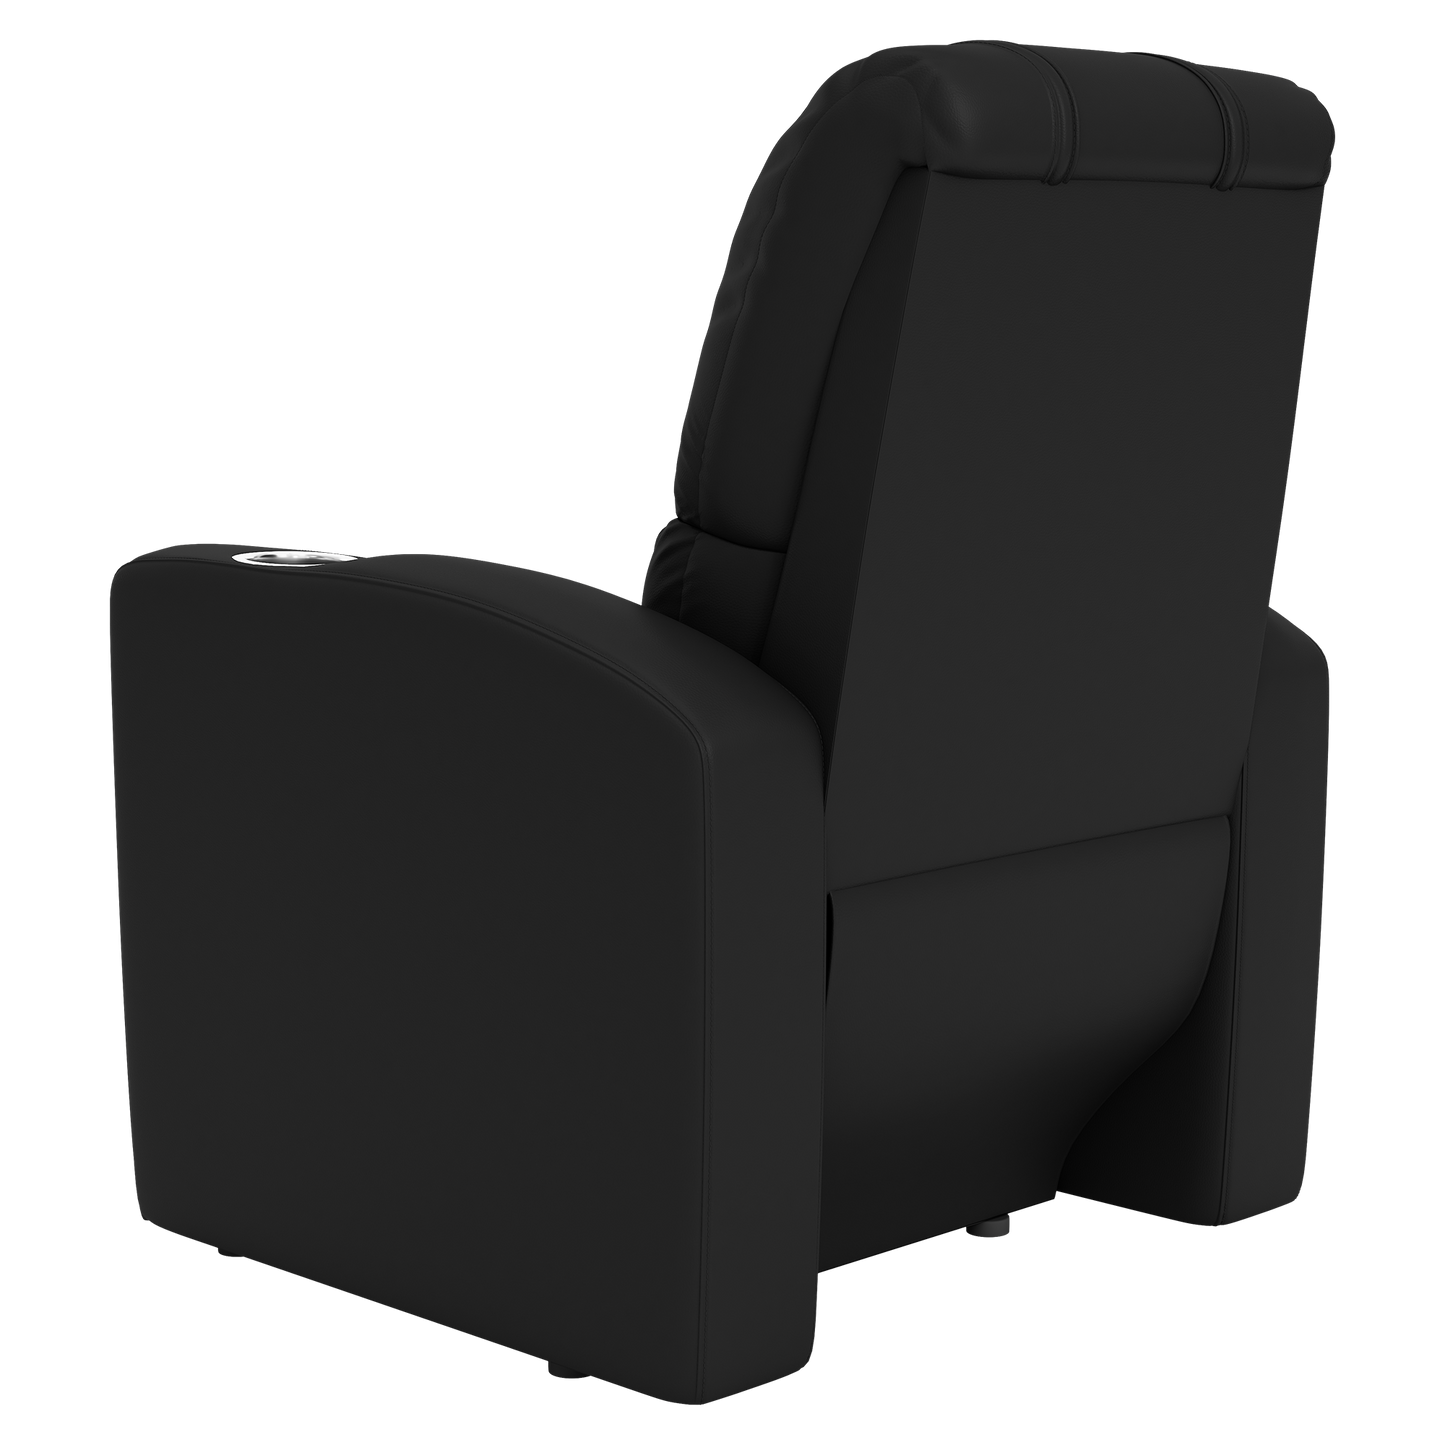 Stealth Recliner with  New Orleans Saints Secondary Logo